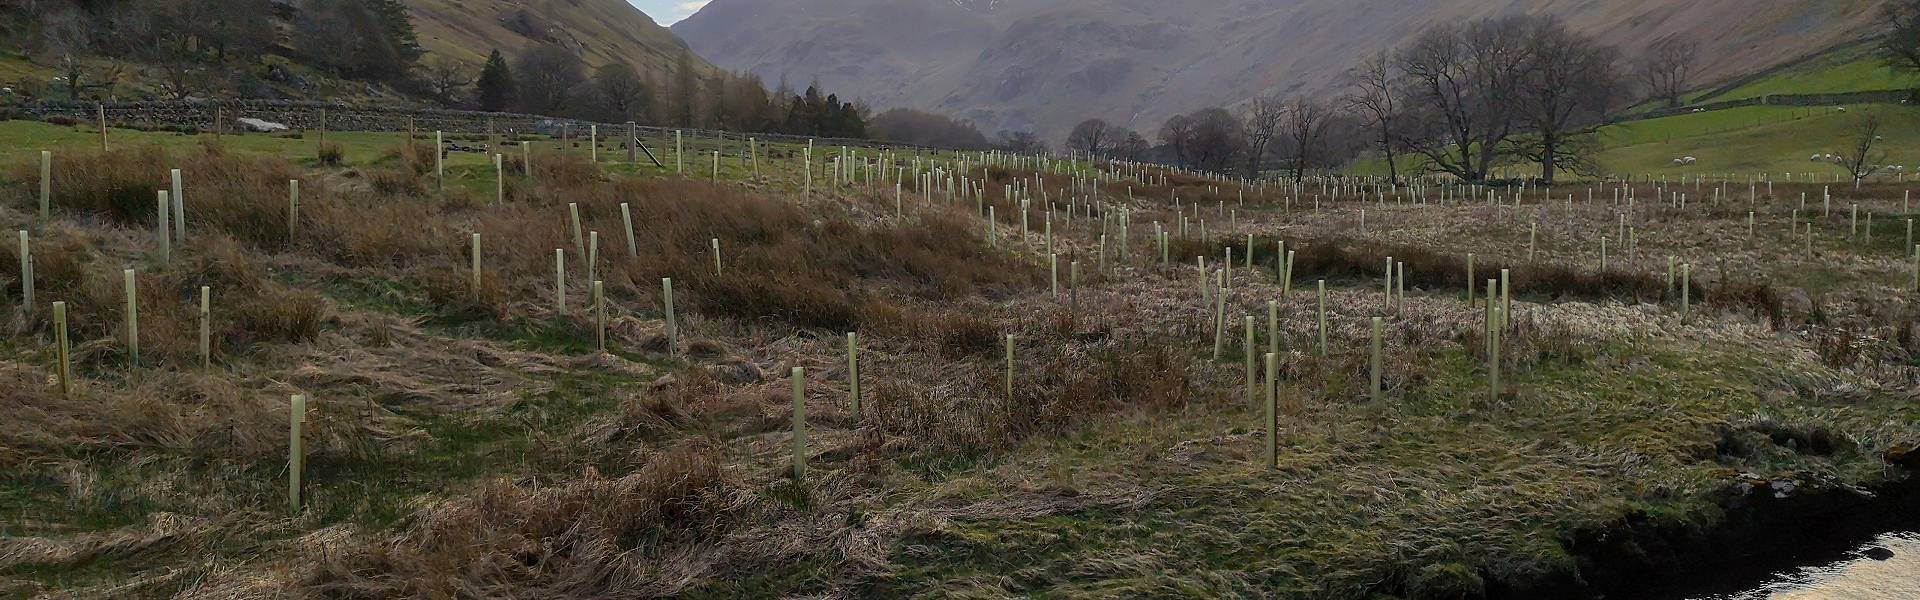 Large scale flood plain tree planting in Grisedale valley